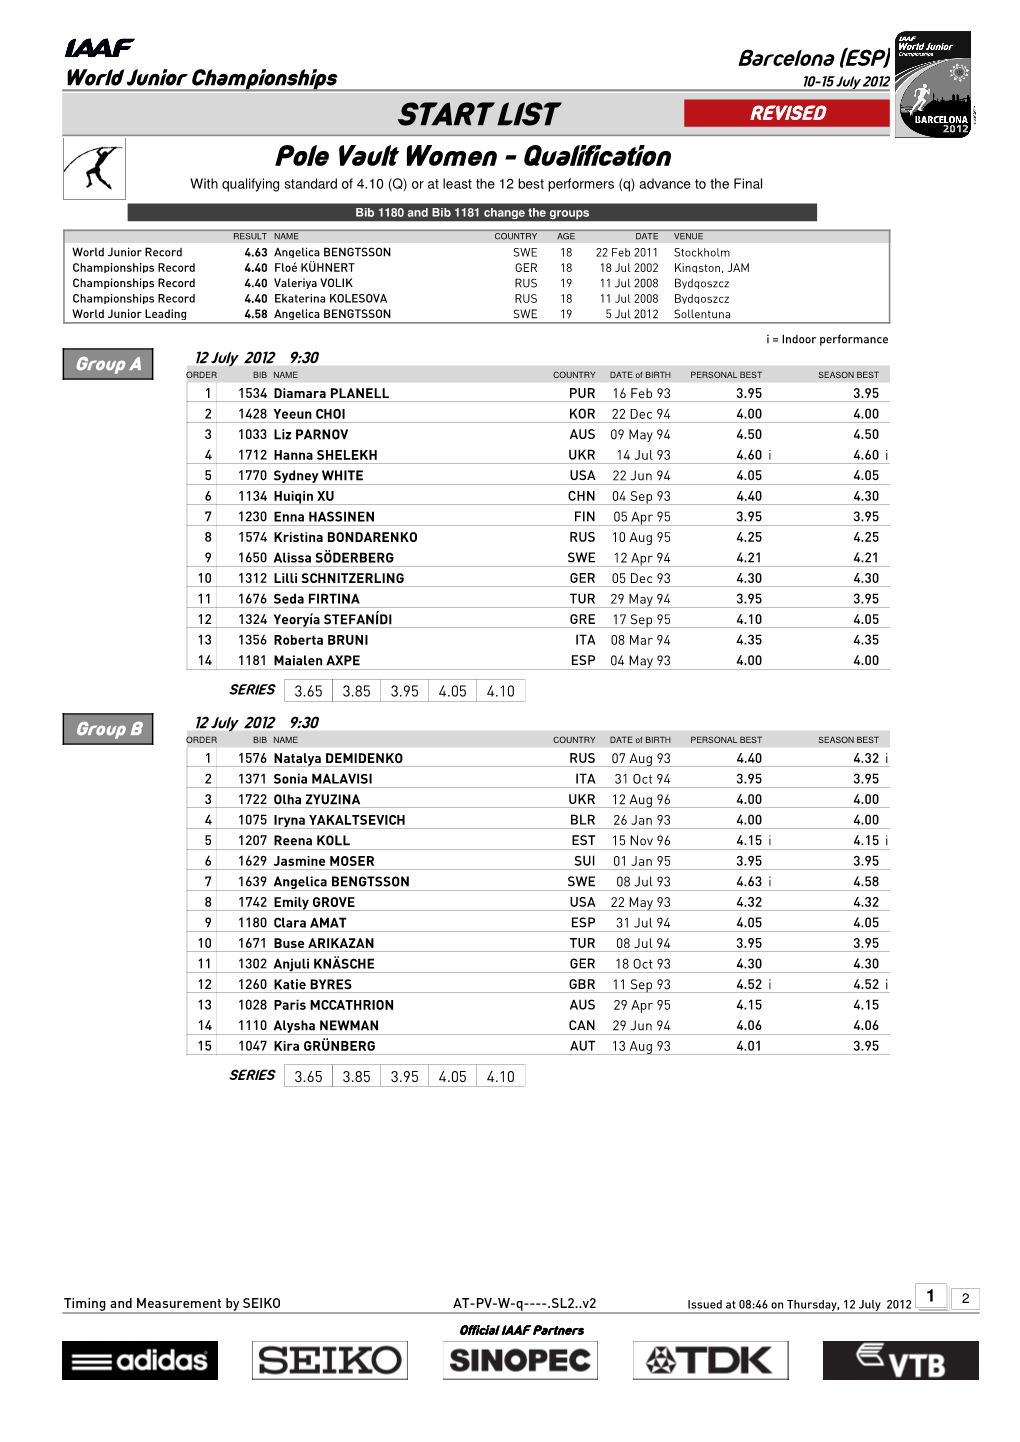 START LIST REVISED Pole Vault Women - Qualification with Qualifying Standard of 4.10 (Q) Or at Least the 12 Best Performers (Q) Advance to the Final